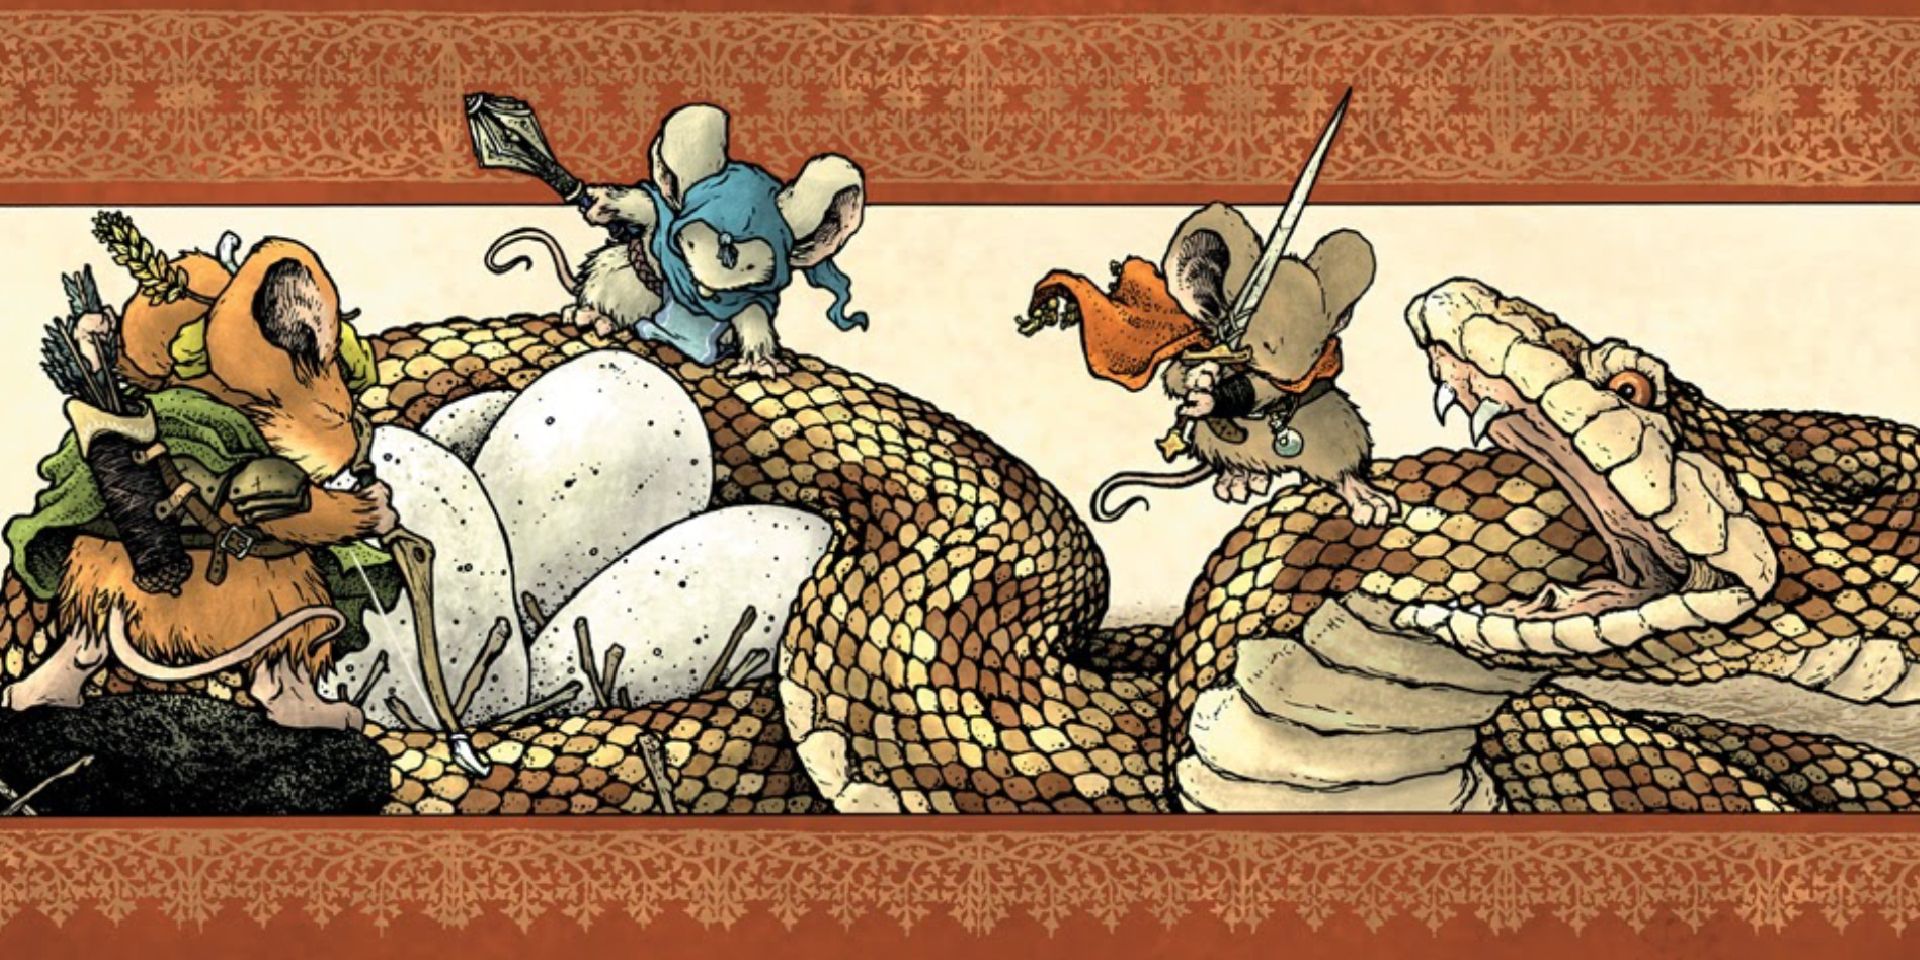 Three Mice in Medival Clothes Fighting A Snake